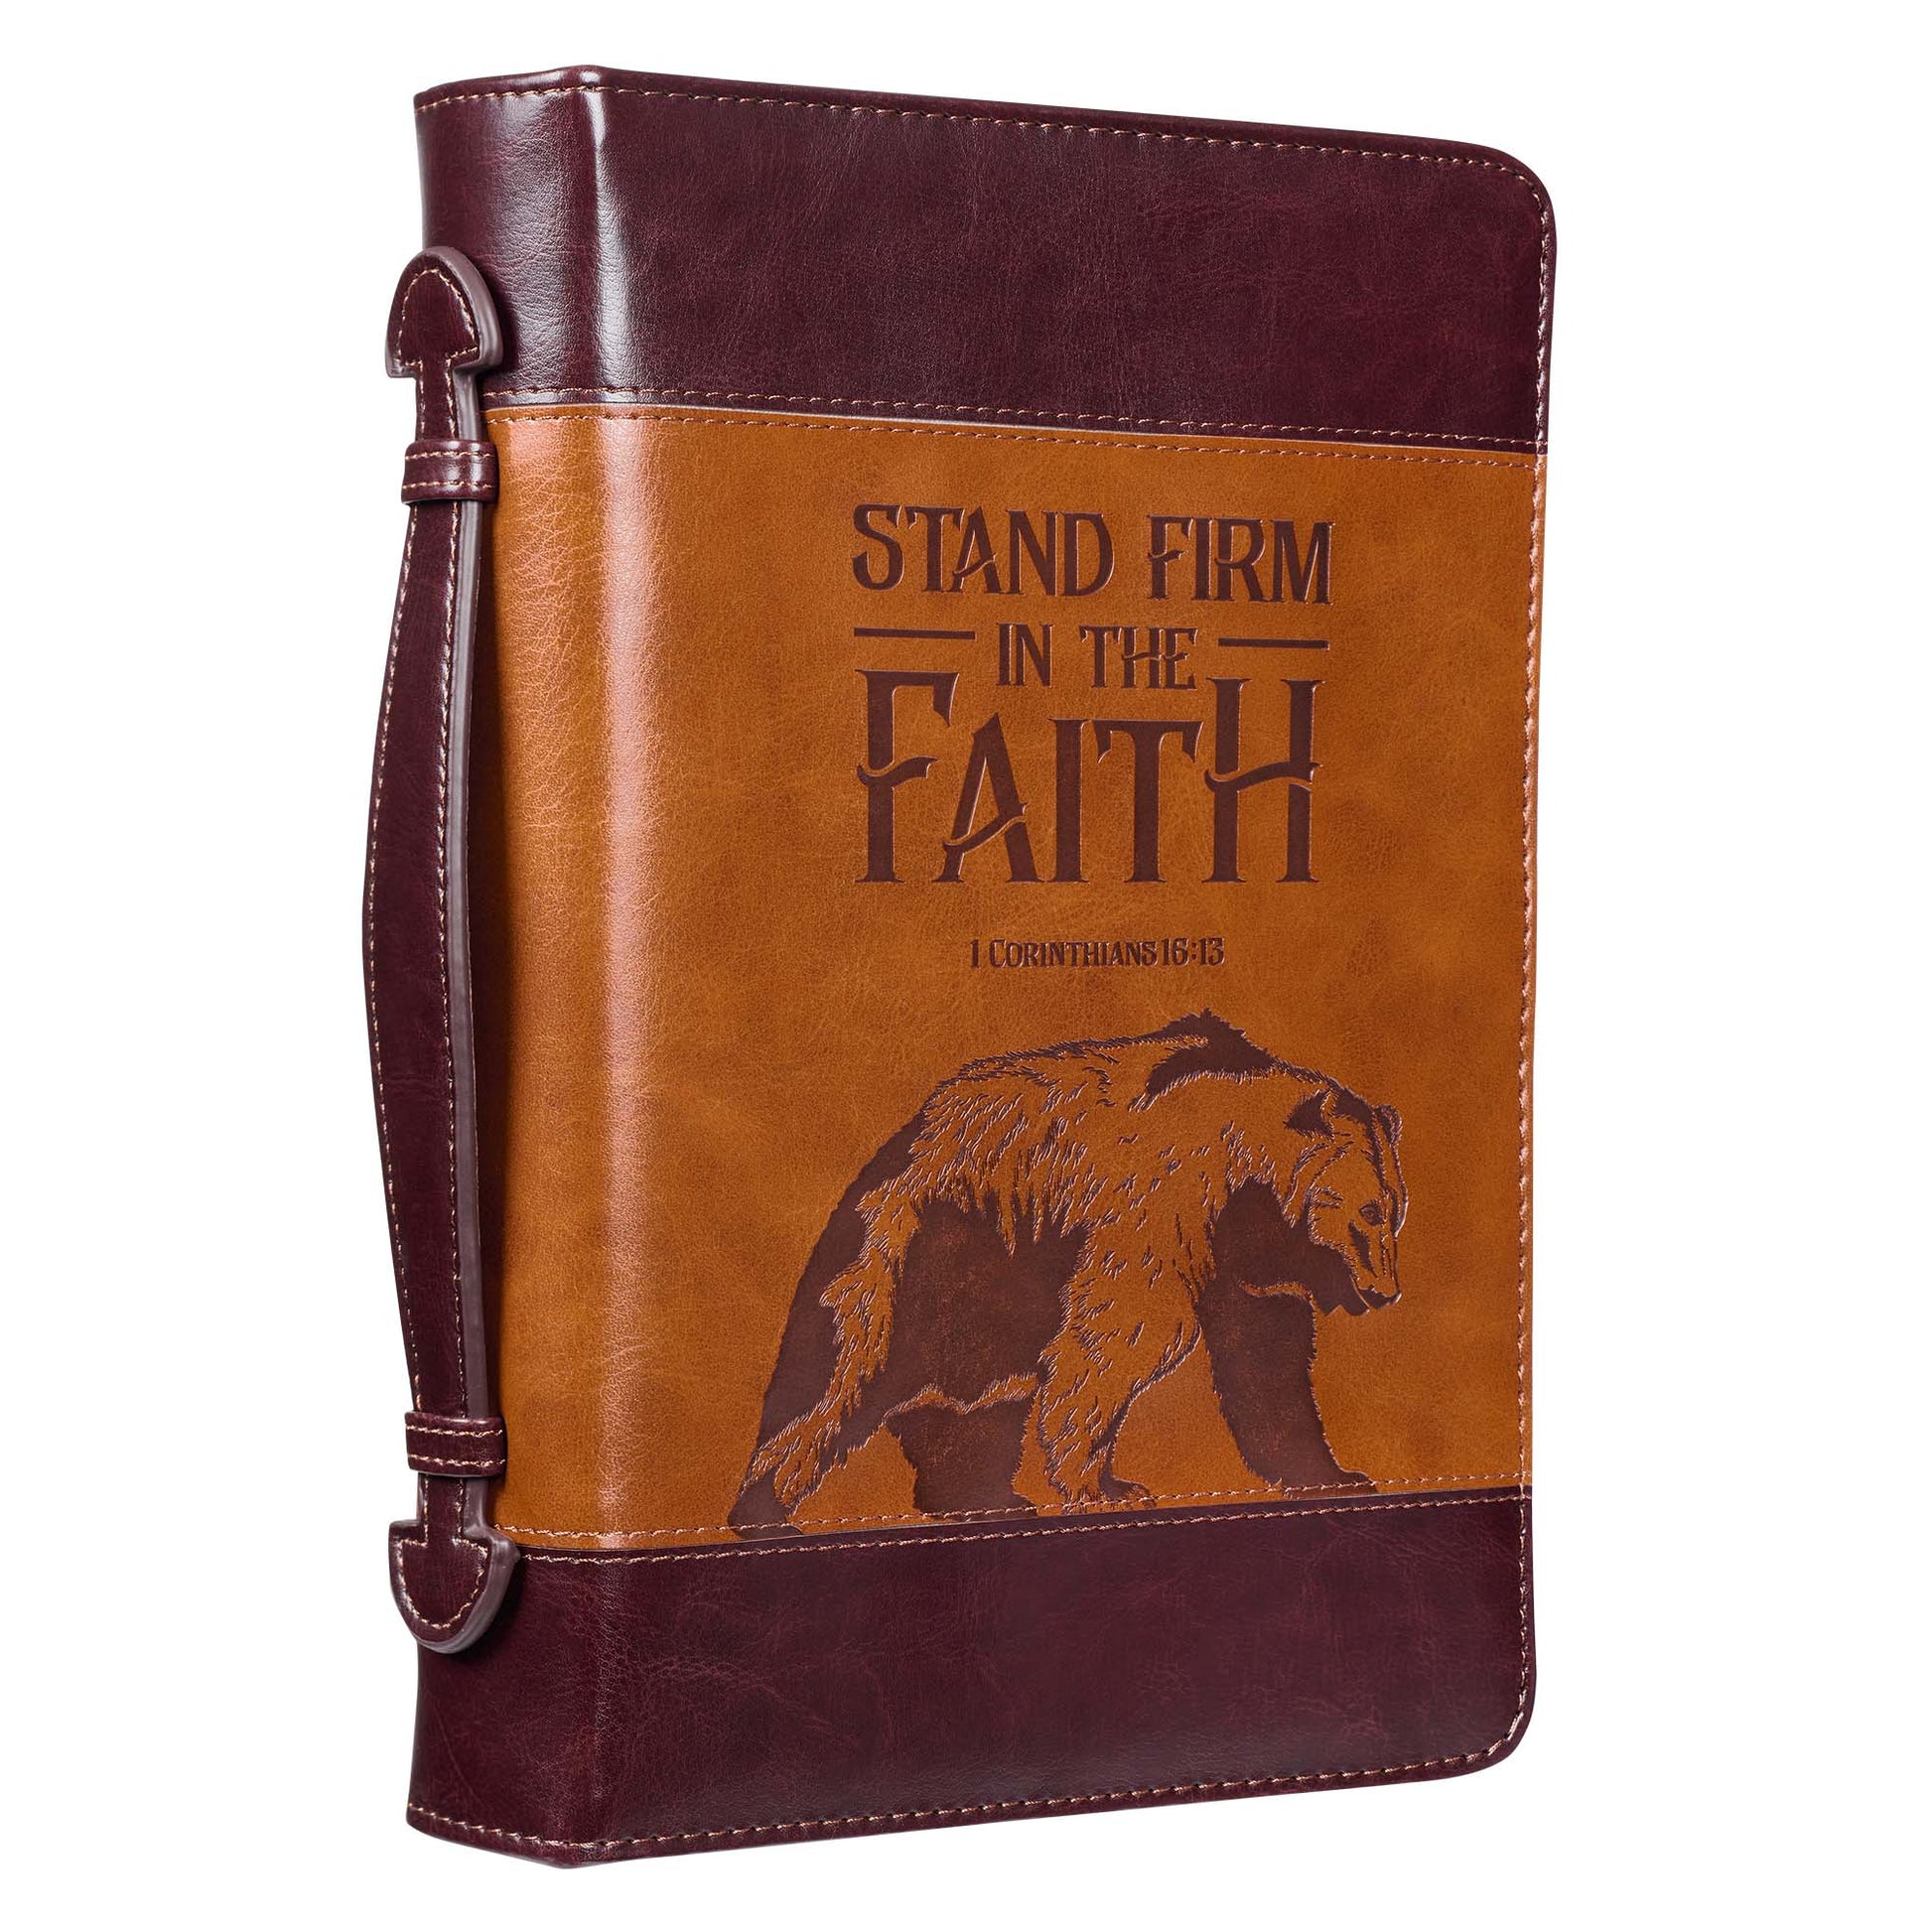 Stand Firm Two-tone Brown Faux Leather Classic Bible Cover - 1 Corinthians 16:13 - The Christian Gift Company